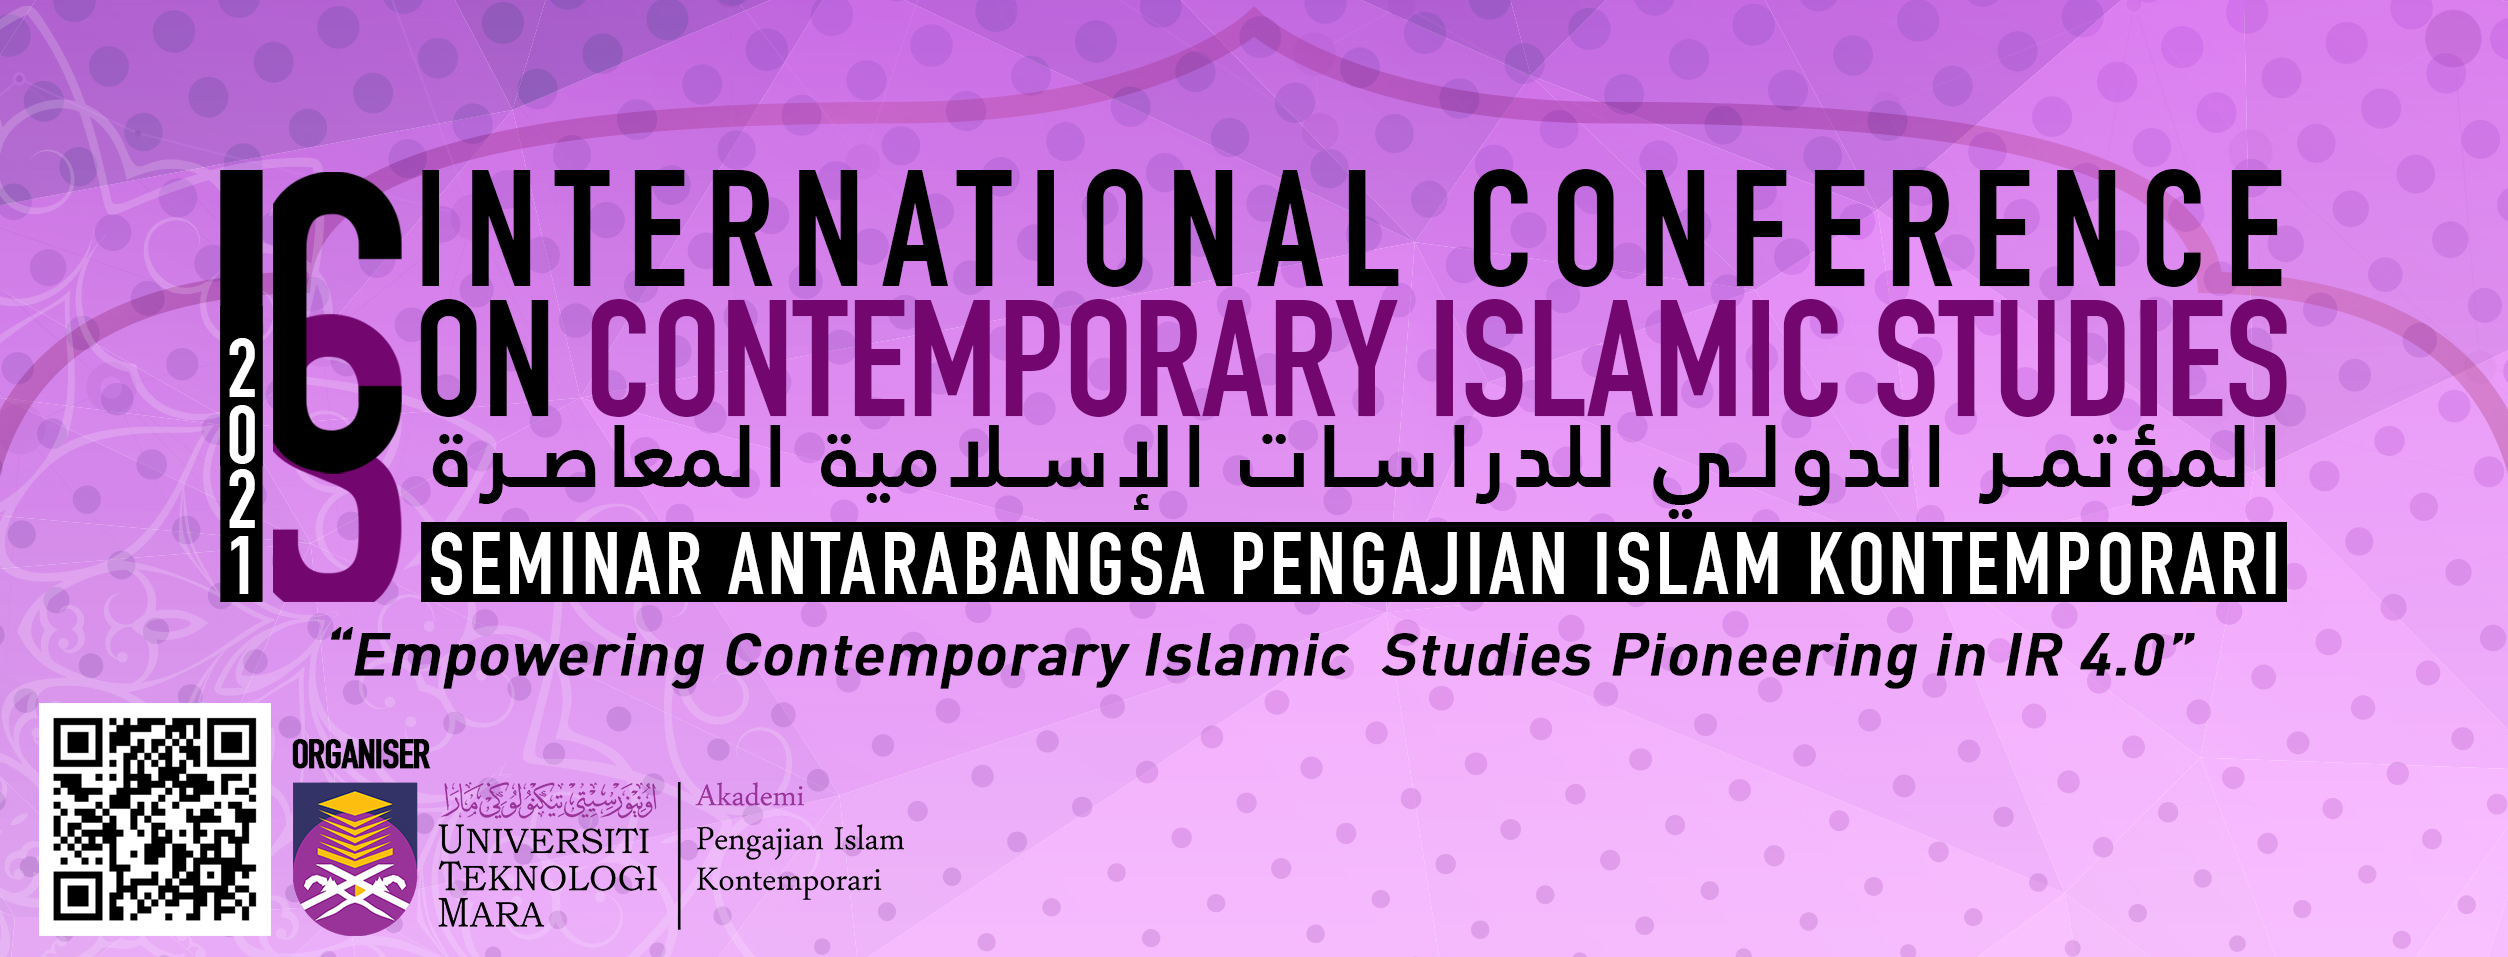 Icis 2021 International Conference On Contemporary Islamic Studies